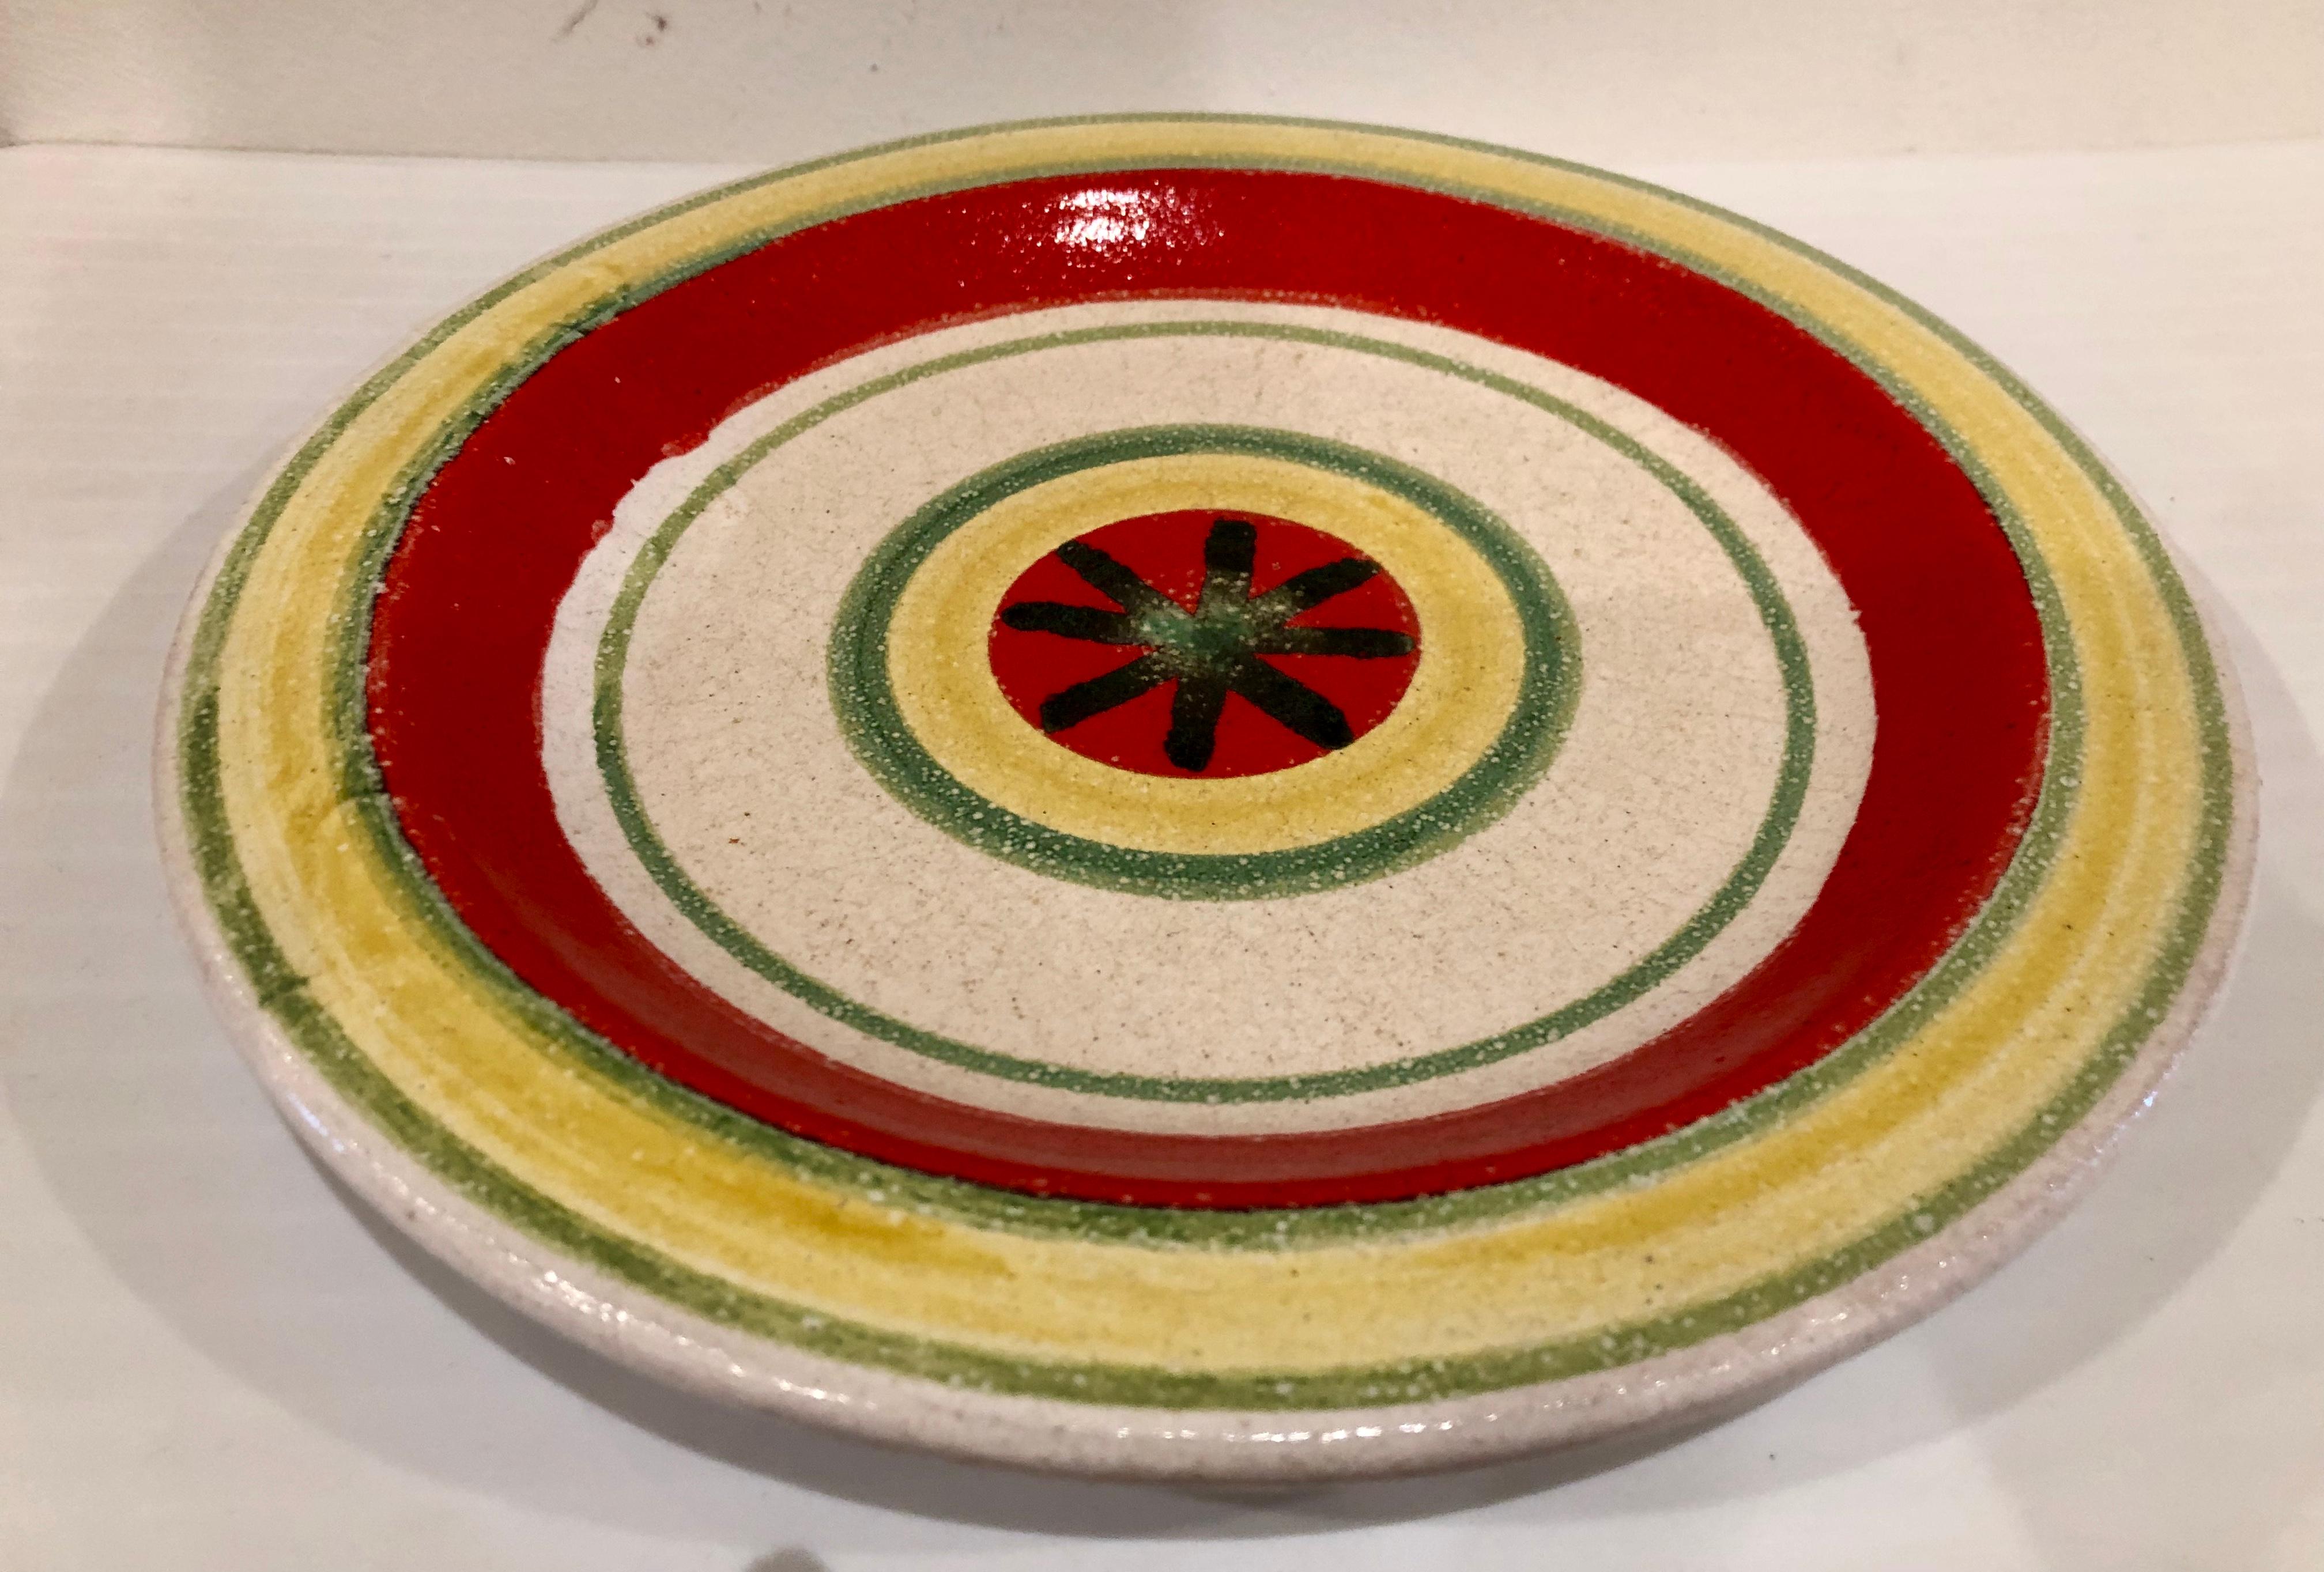 Beautiful design on this ceramic plate, highly collectible plate by DeSimone, circa 1960s, made in Italy, great condition no chips or cracks very light wear. Signed and numbered.